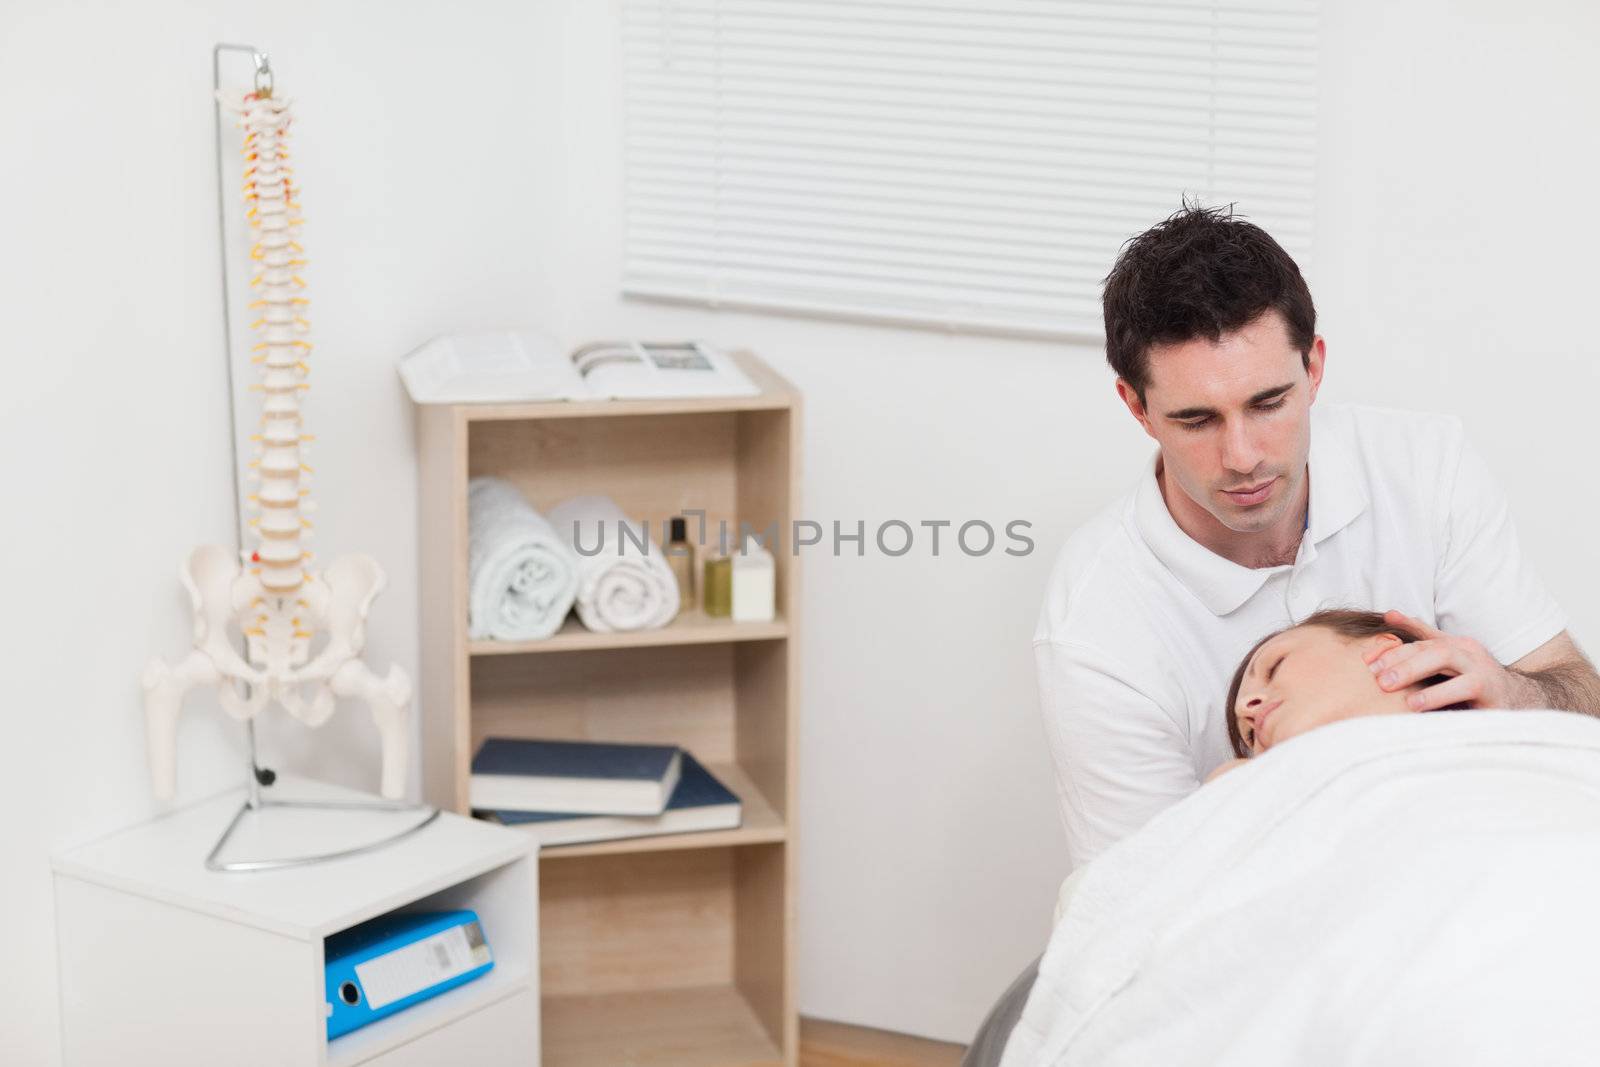 Neck of woman being manipulated by the chiropractor in a medical room